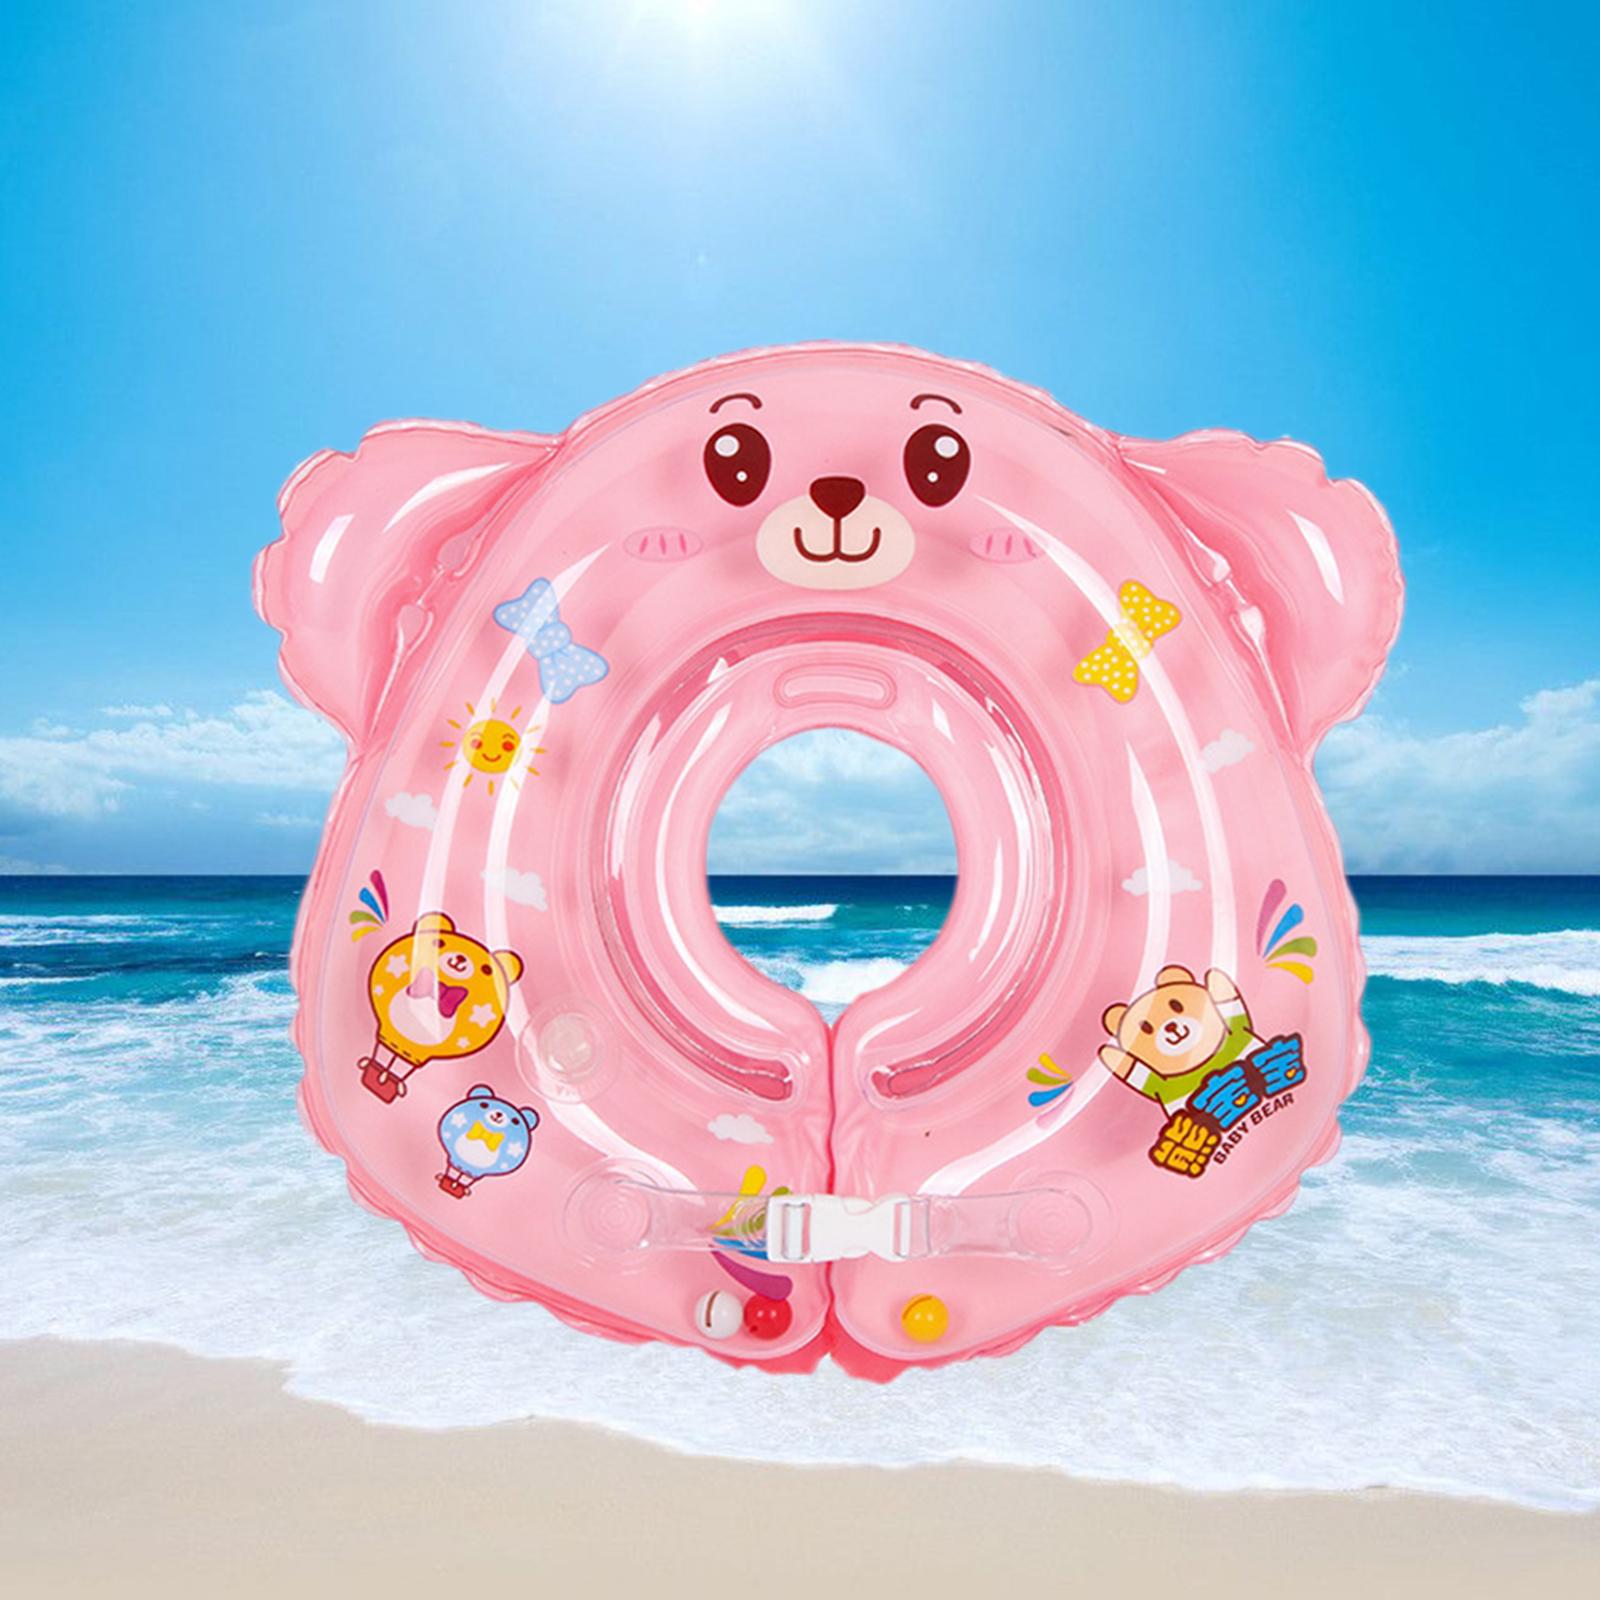 Inflatable Baby Swim Float Children Neck Ring Trainer Bathtub Pool Toy Pink